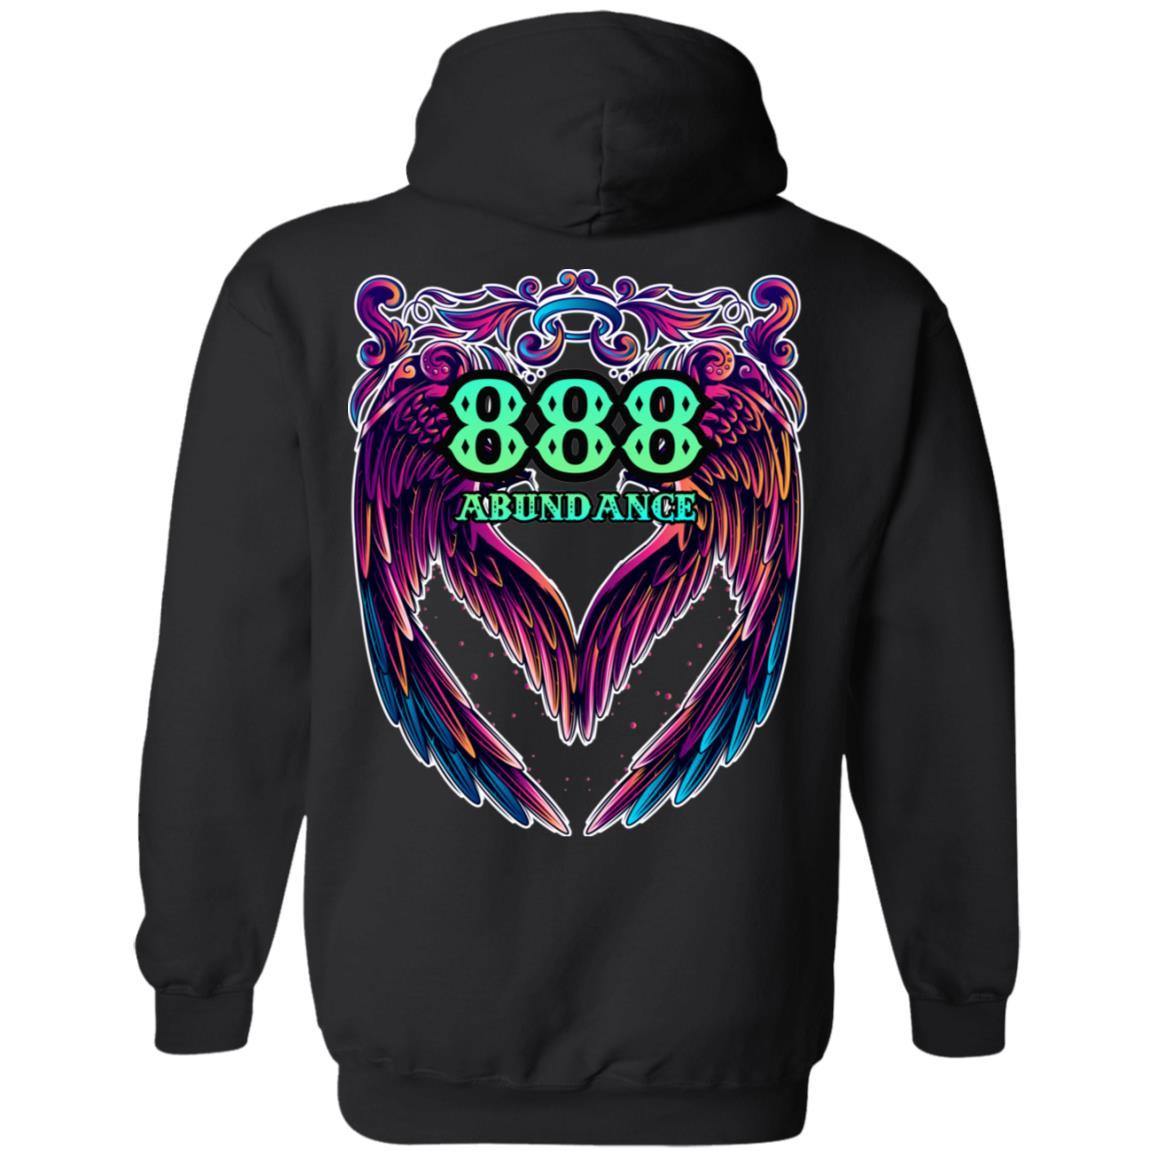 888 ANGEL NUMBER - ABUNDANCE - DESIGN ON BACK - SCORP ZONE LOGO ON FRONT - Z66 Pullover Hoodie - ScorpZone